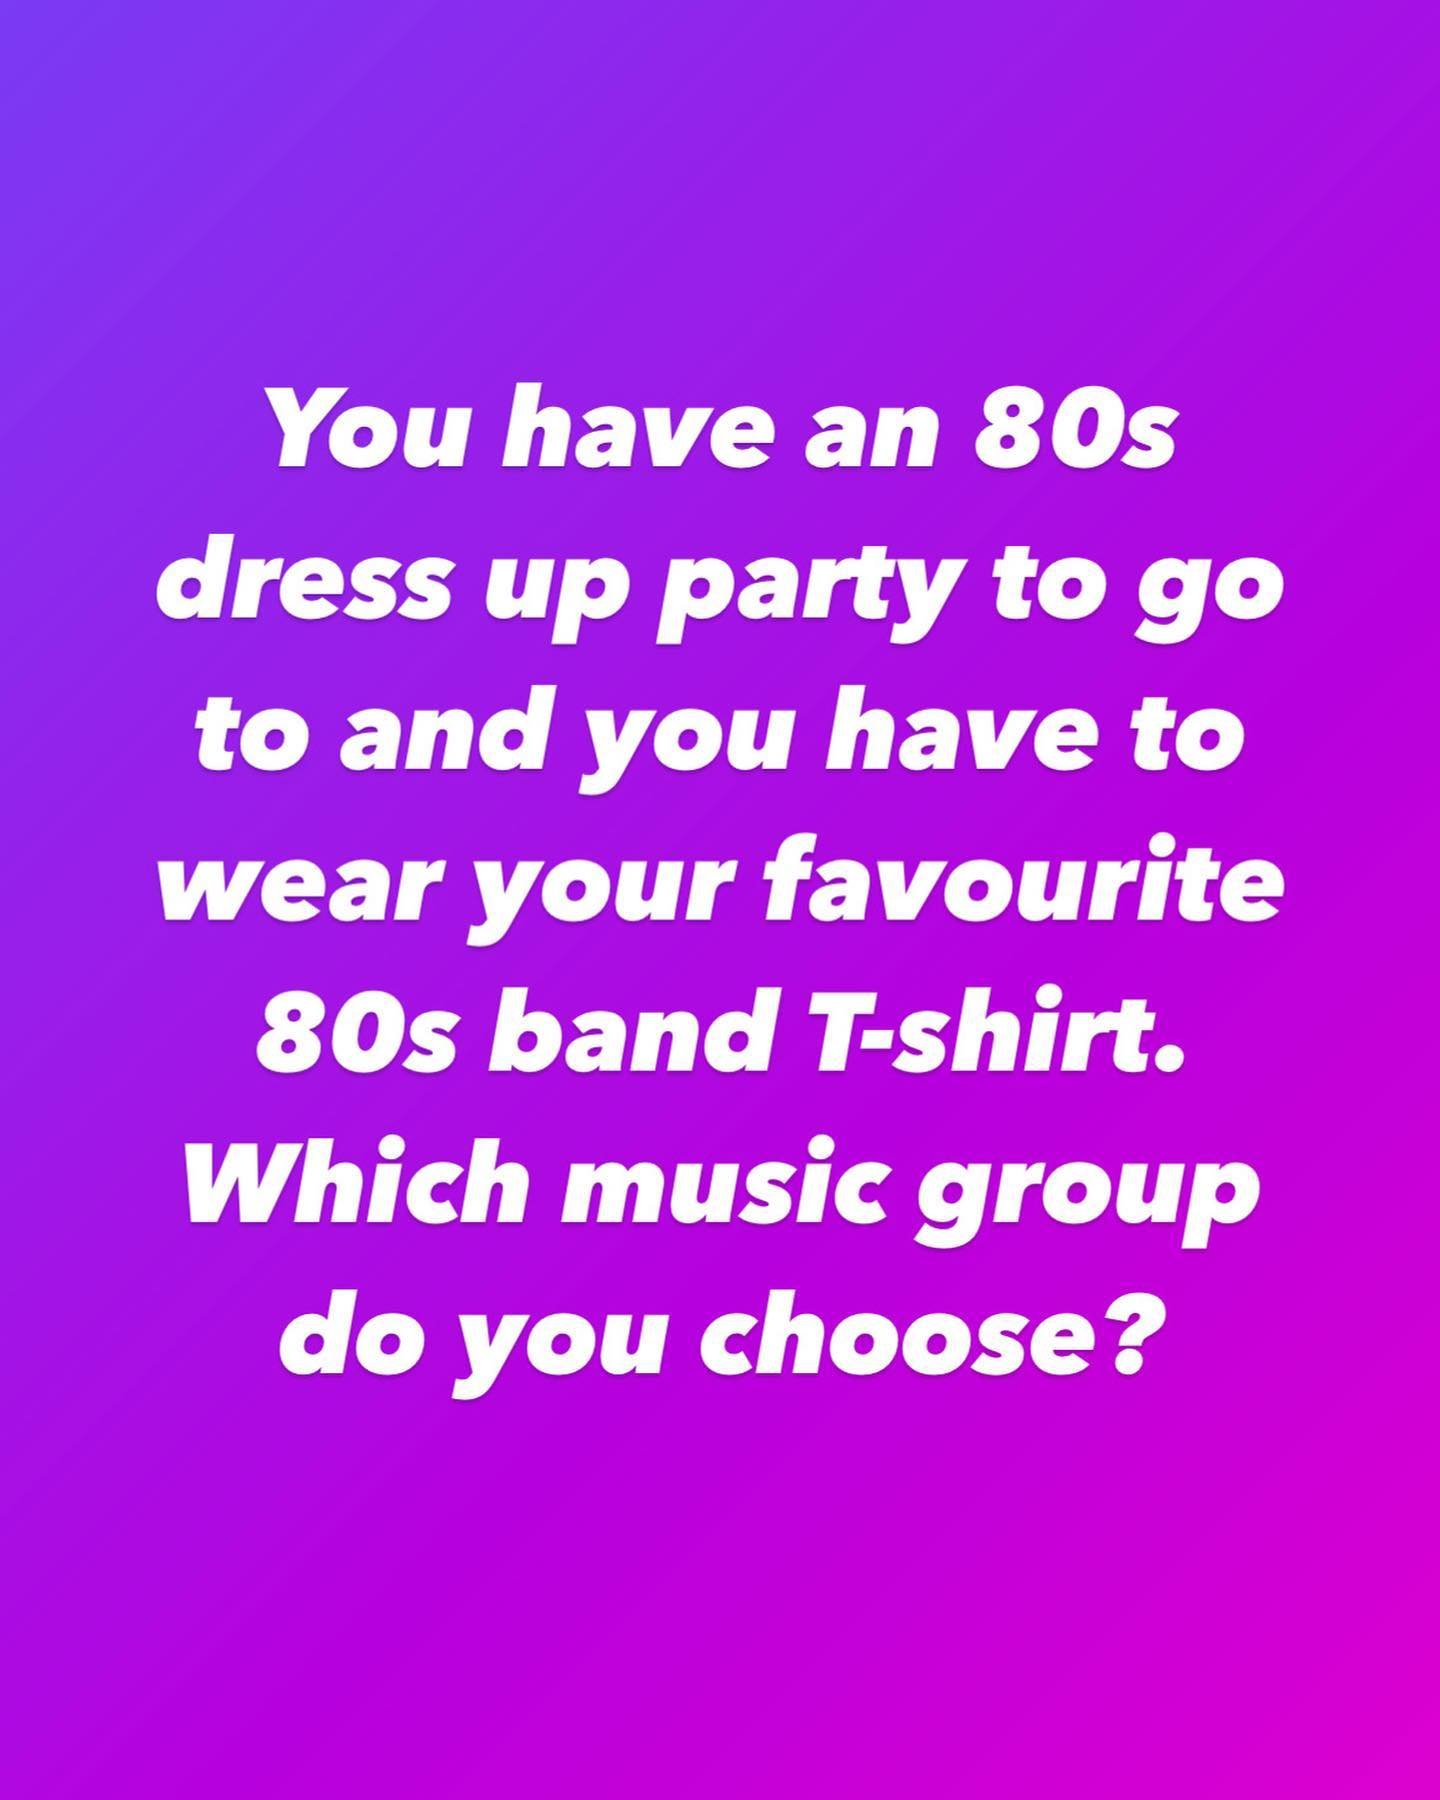 You have an 80s dress up party to go to and you have to wear your favourite 80s band T-shirt. Which music group do you choose? 🤔🤩